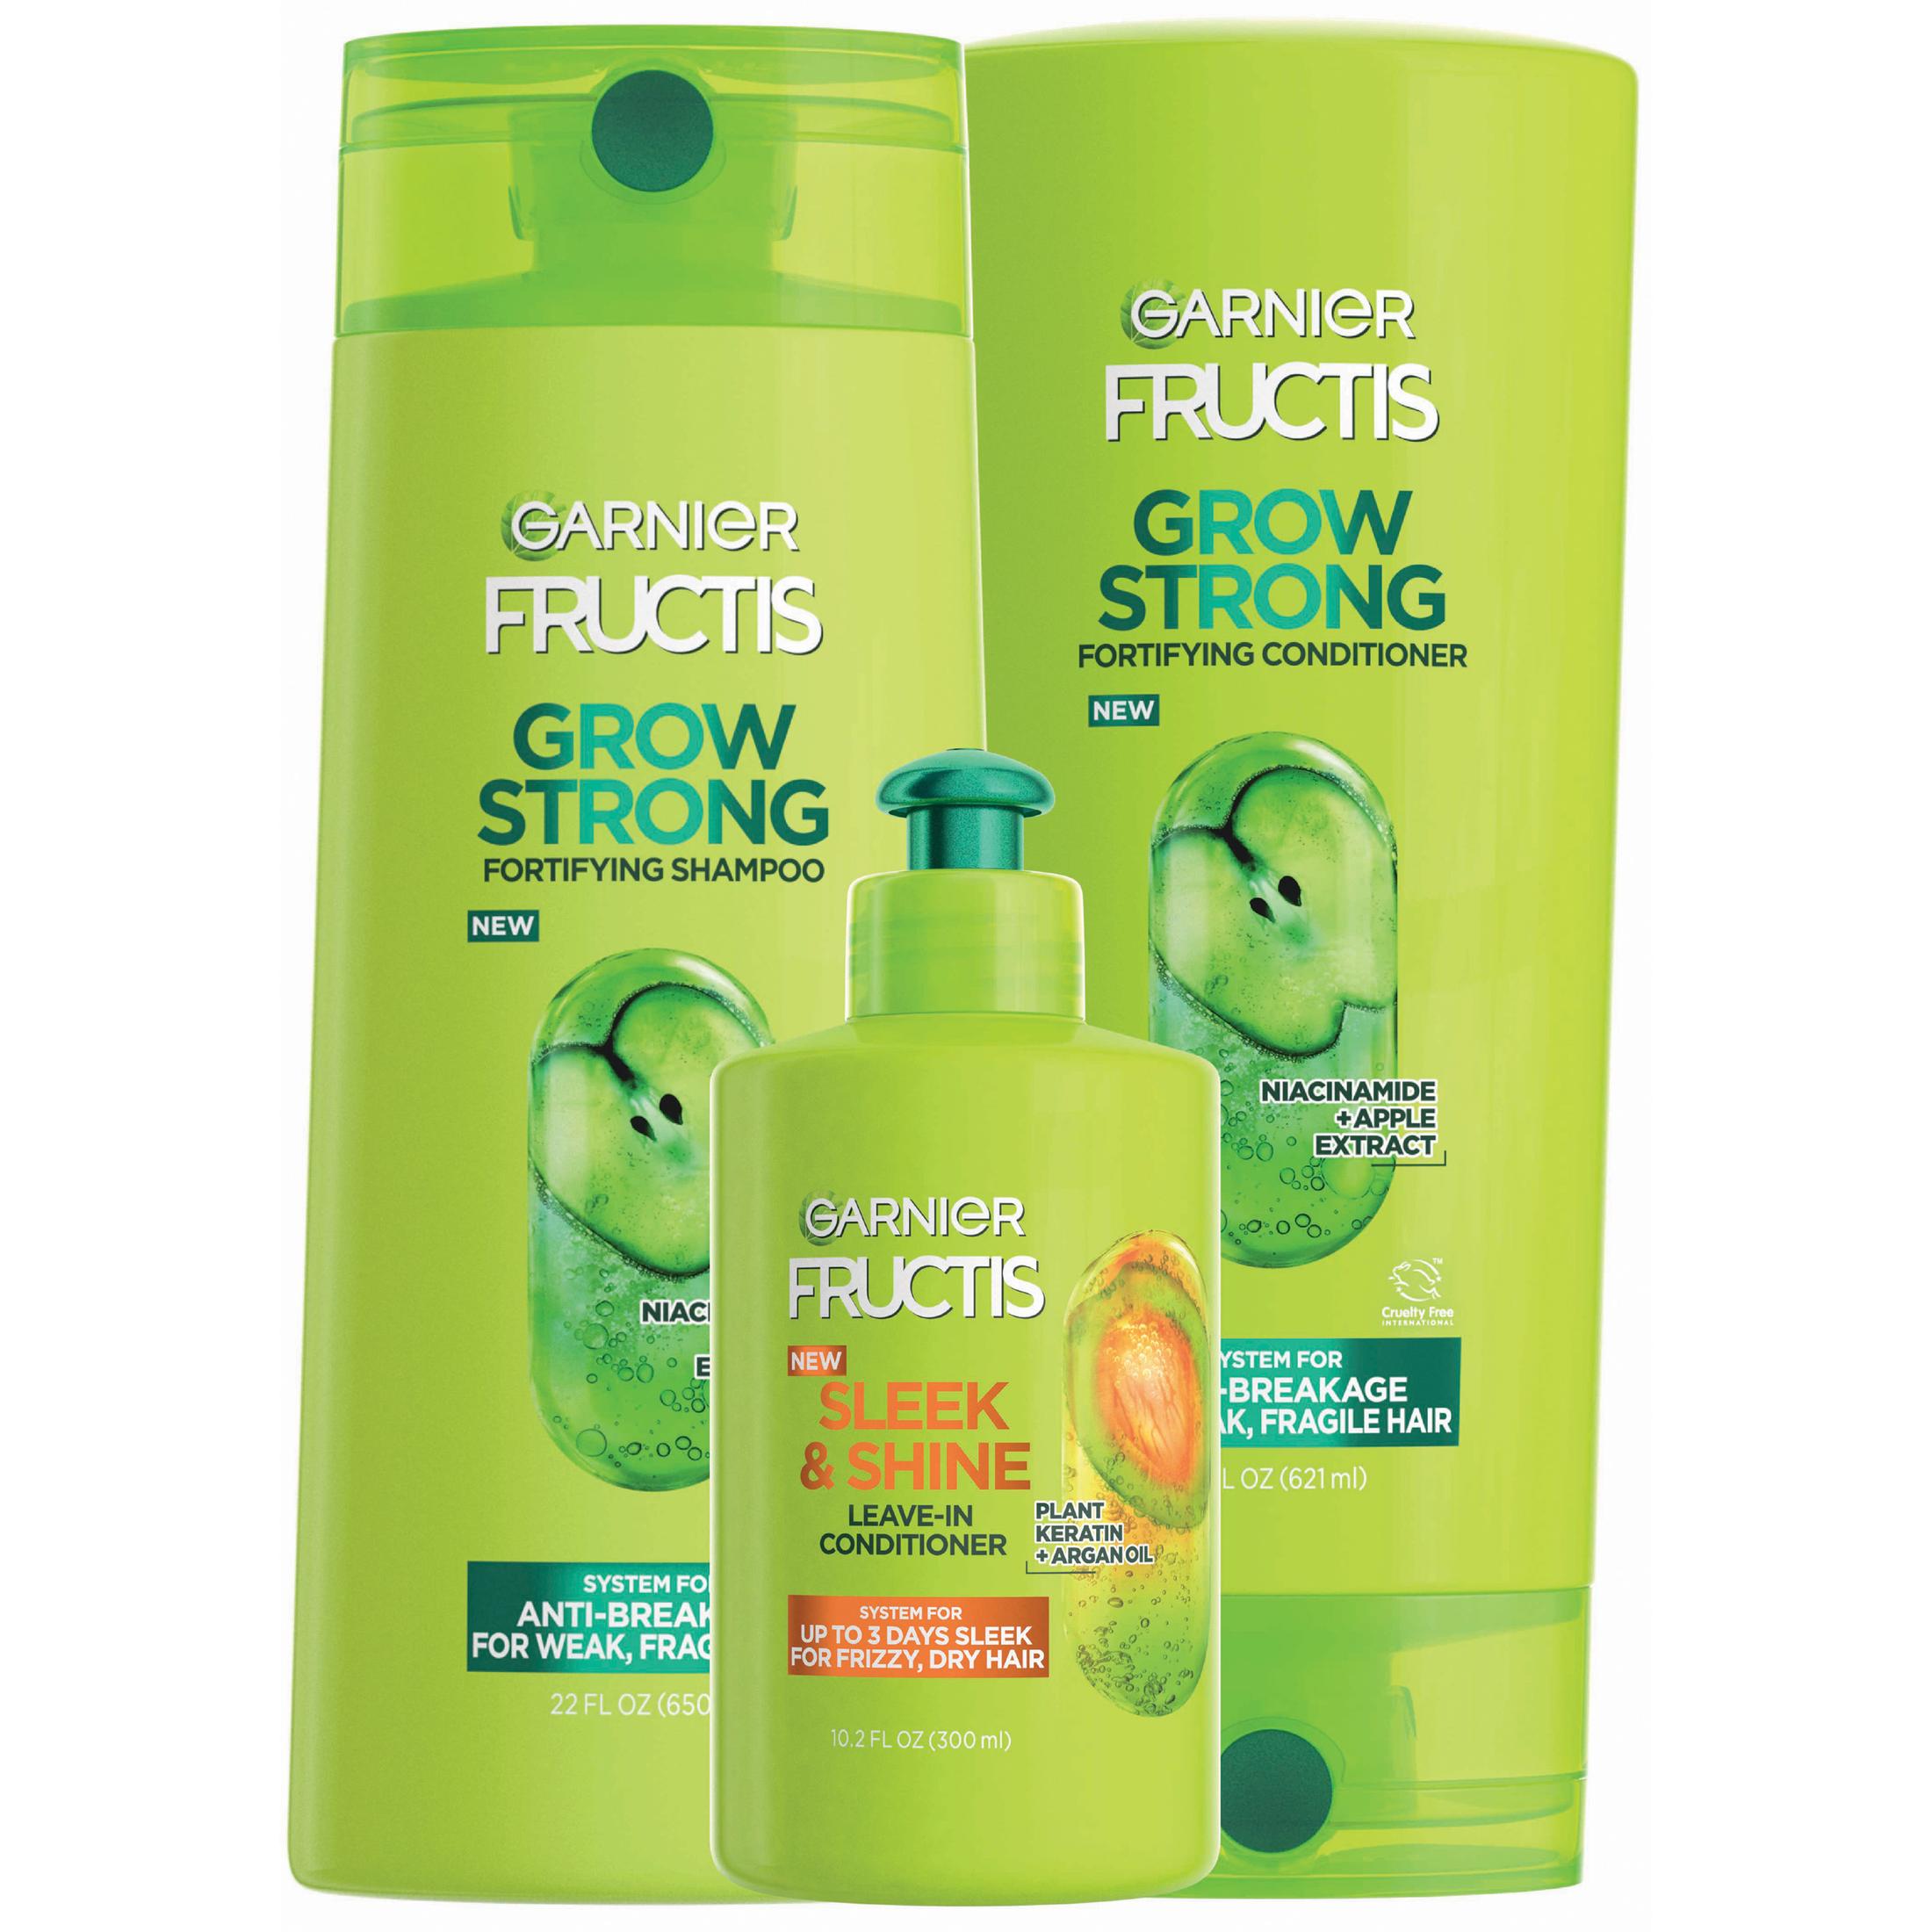 ($16 Value) Garnier Fructis Grow Strong Shampoo Conditioner and Treatment Gift Set, Holiday Kit - image 2 of 4